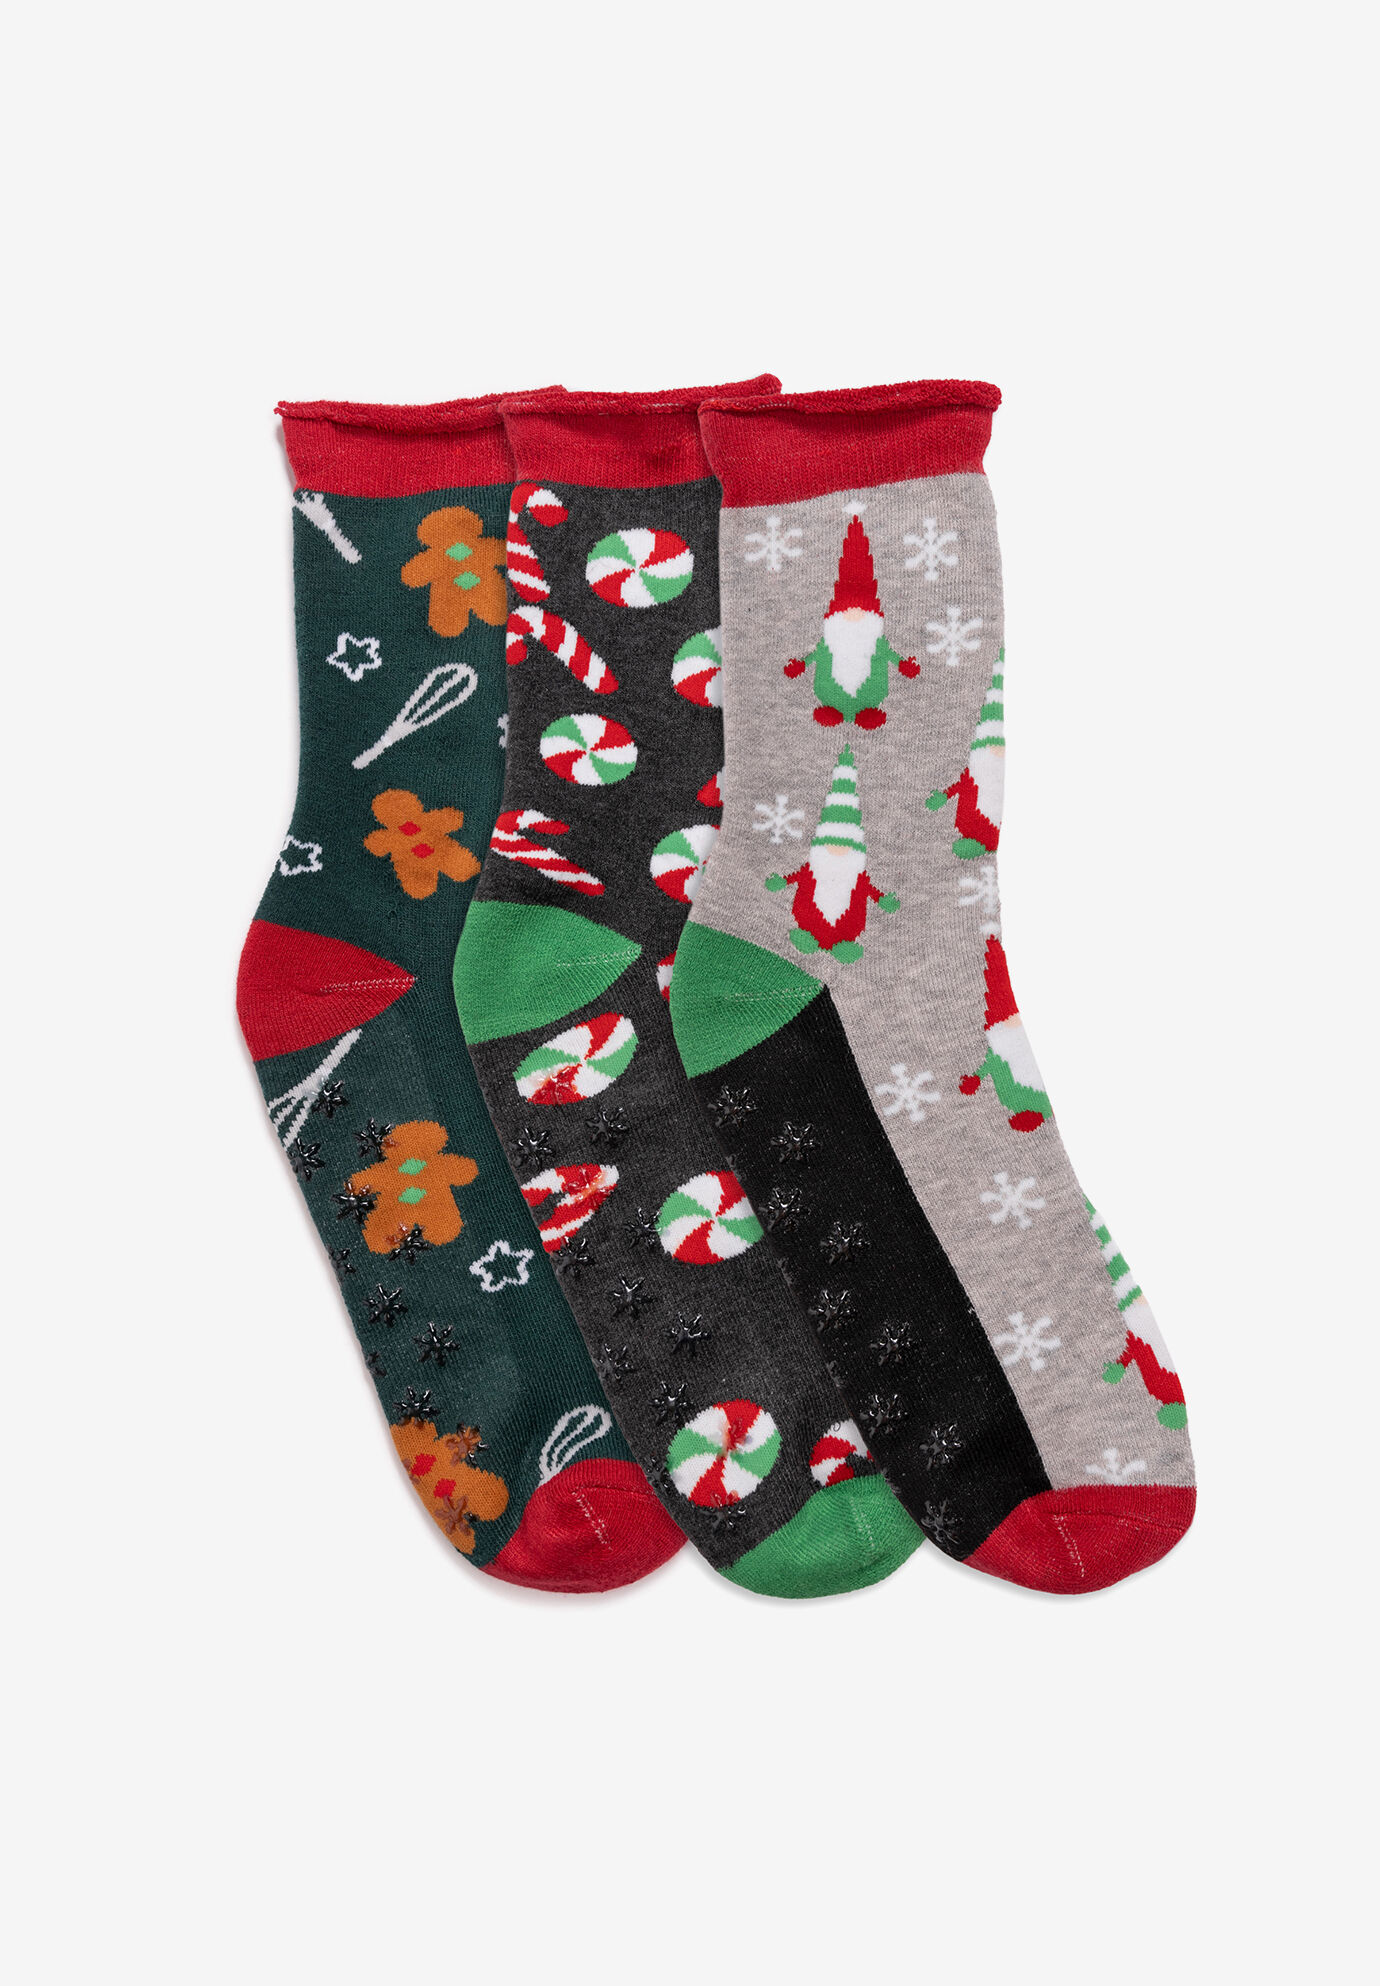 Women's 3 Pack Holiday Crew Socks by MUK LUKS in Christmas Morning (Size ONE)